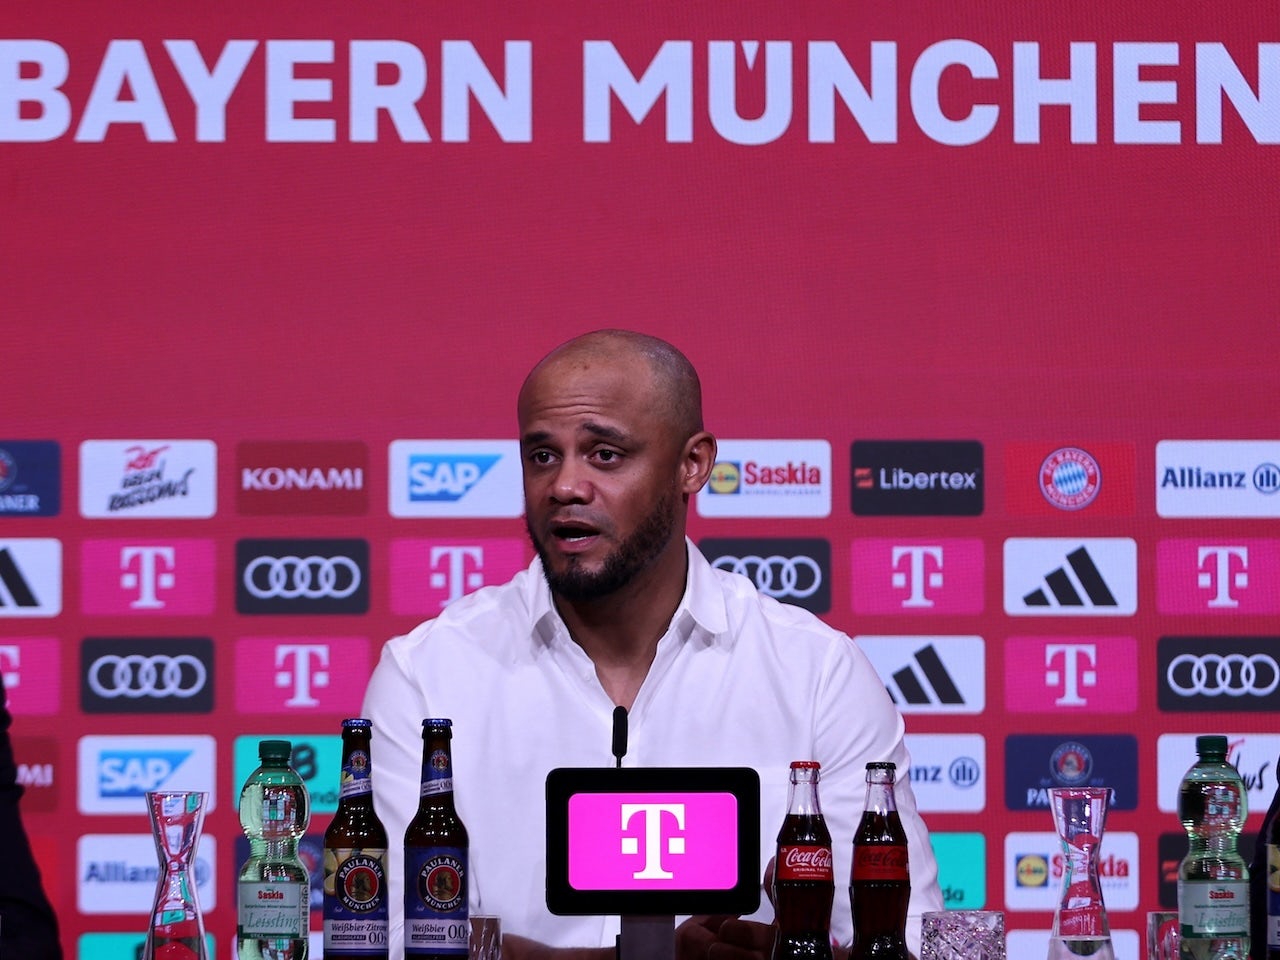 Bayern Munich confirm arrival of 29-year-old in a deal worth up to £47.4m